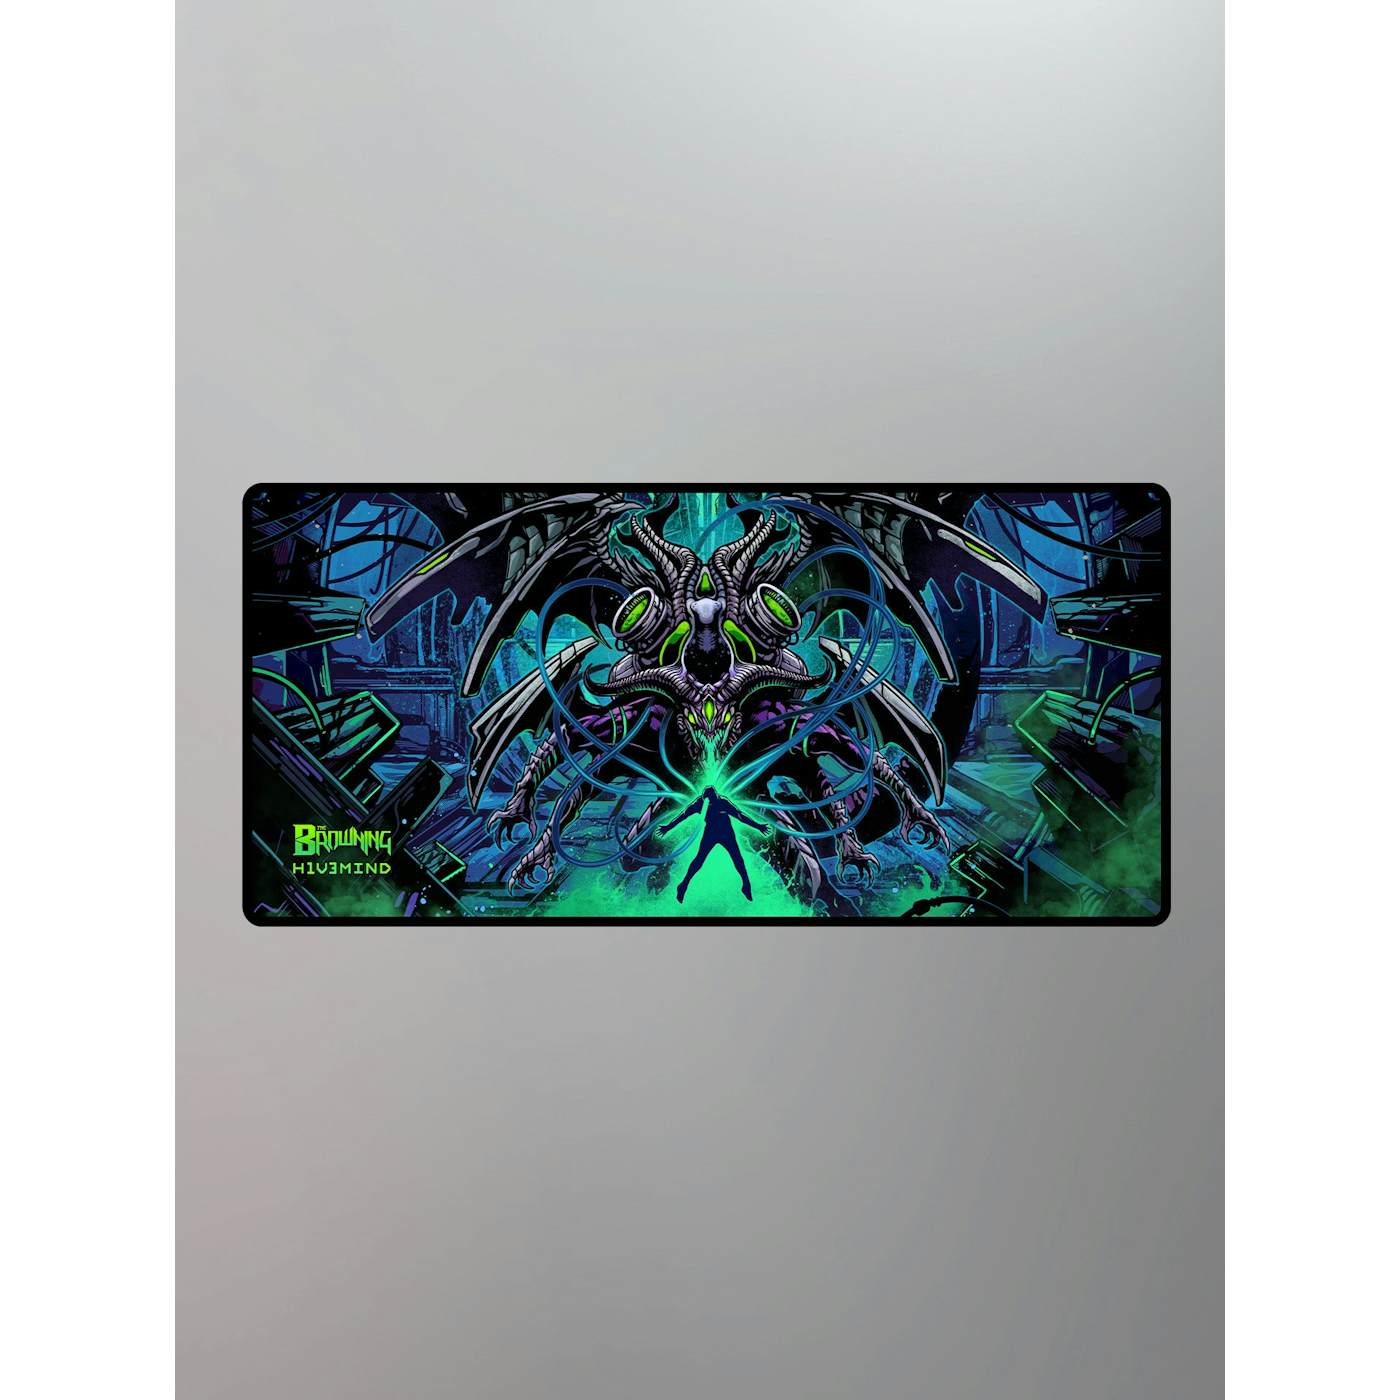 The Browning - Hivemind Gamer Mousepad